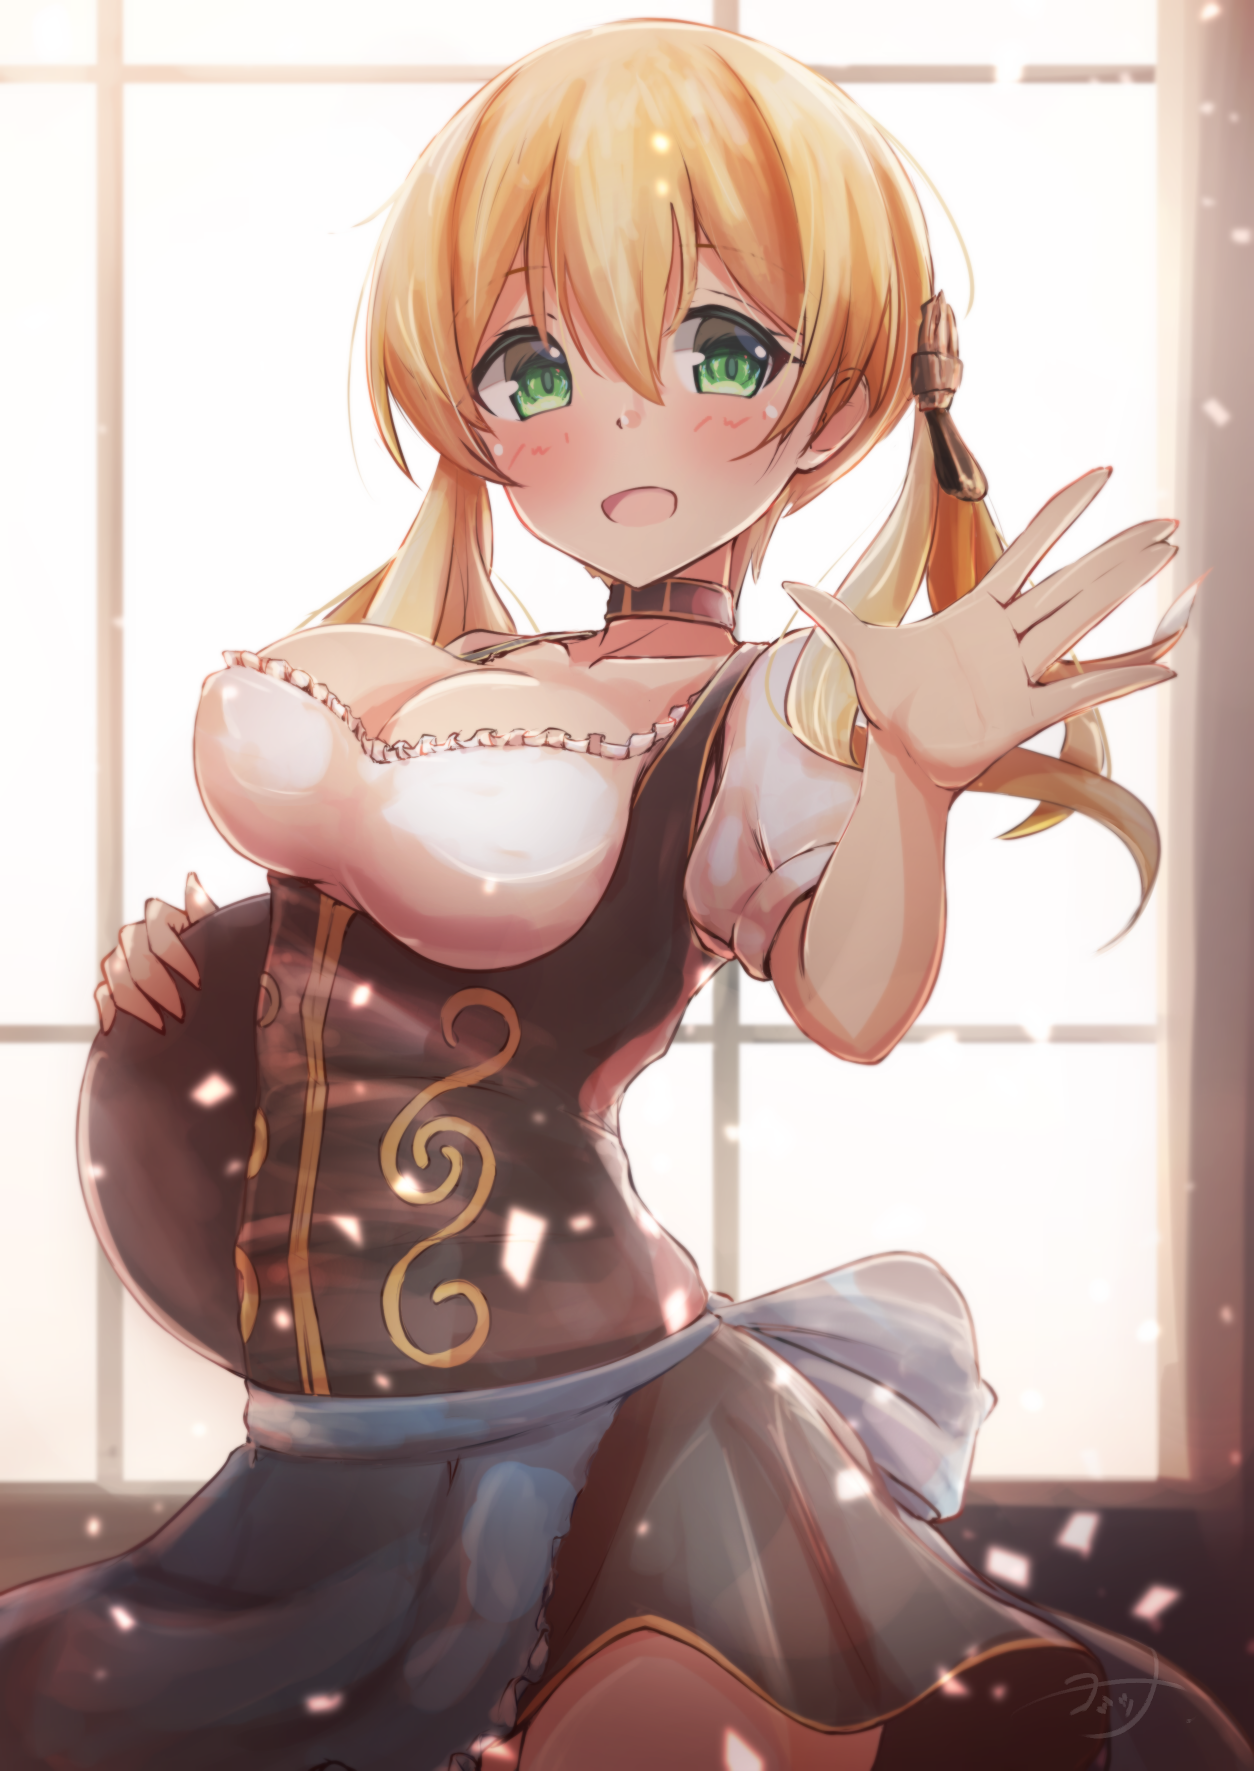 Anime 1254x1771 anime anime girls Kantai Collection Prinz Eugen (KanColle) twintails blonde solo artwork digital art fan art maid outfit